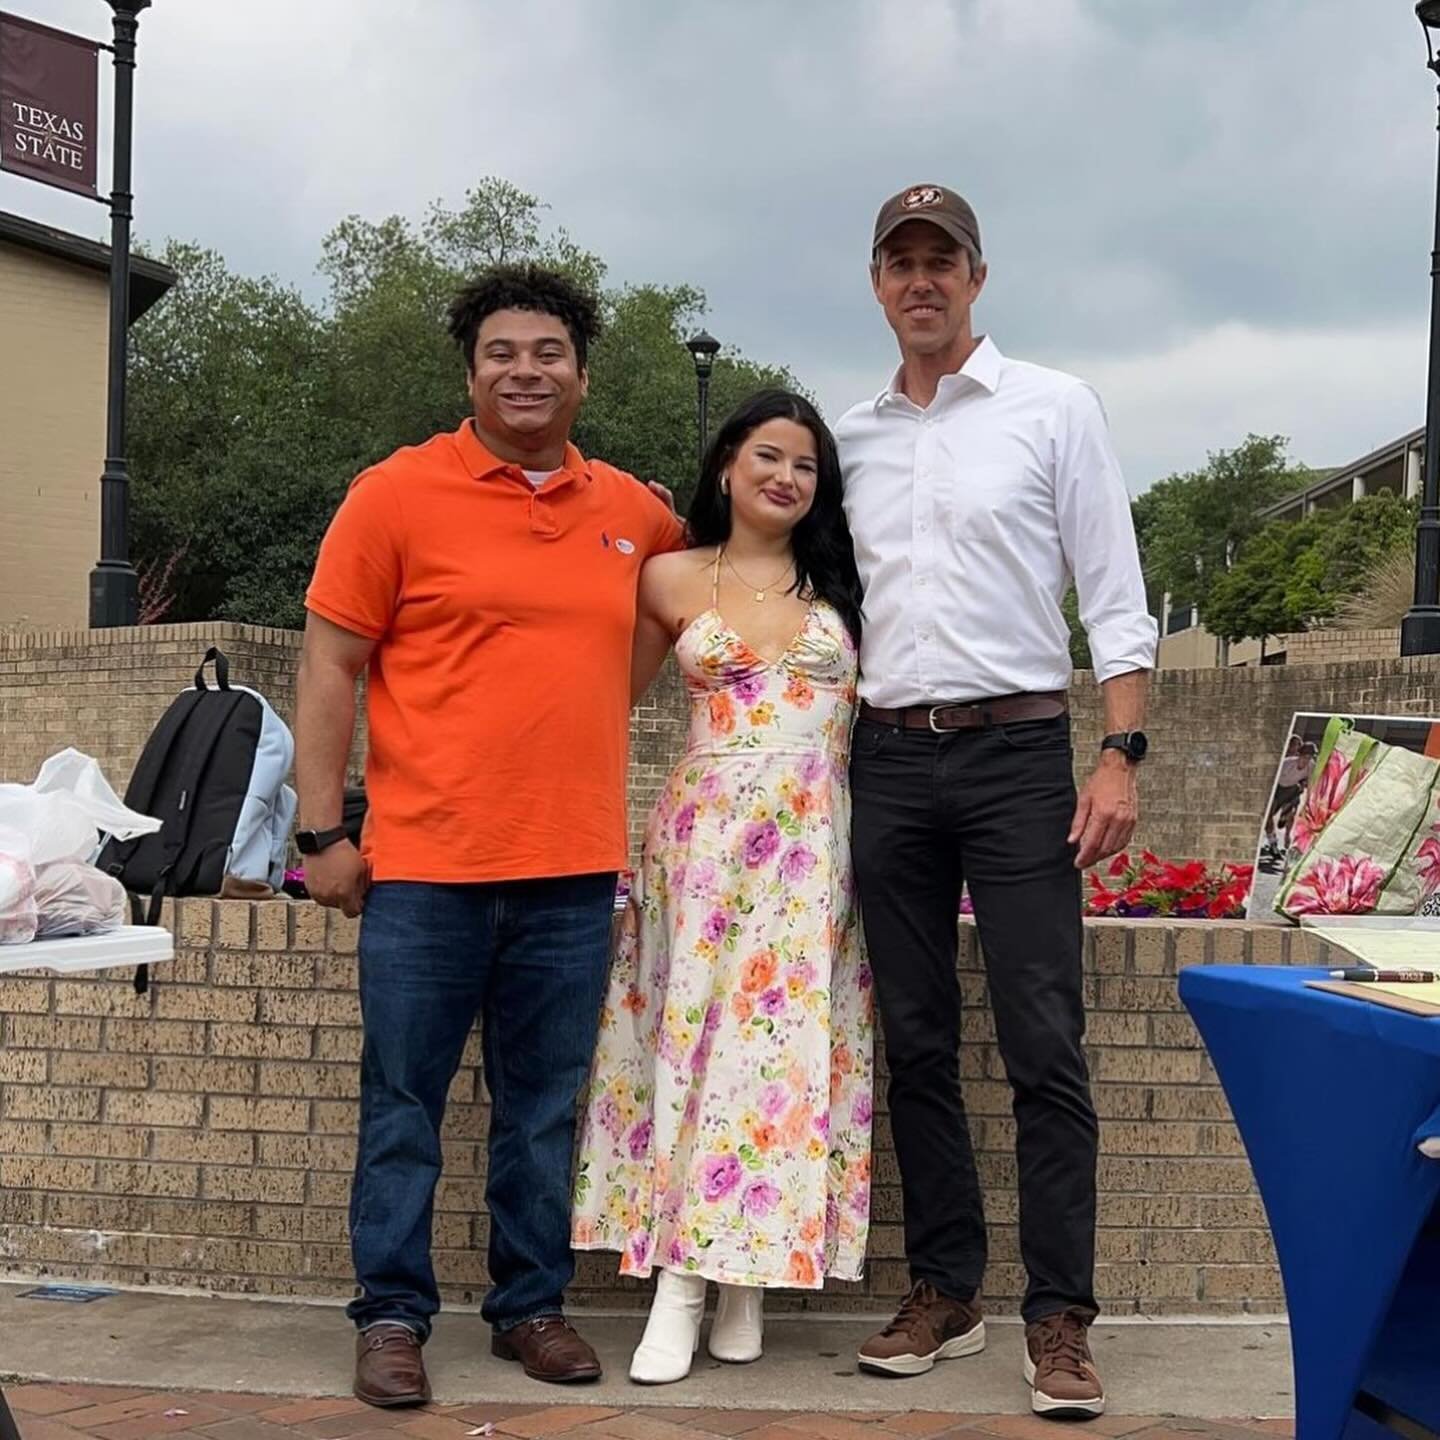 This past weekend was one for the books from Brunch with Beto where Beto spoke about his book &mdash; &ldquo;We&rsquo;ve Got to Try: How the Fight for Voting Rights Makes Everything Else Possible&rdquo;, joining Planned Parenthood Texas Votes in cele